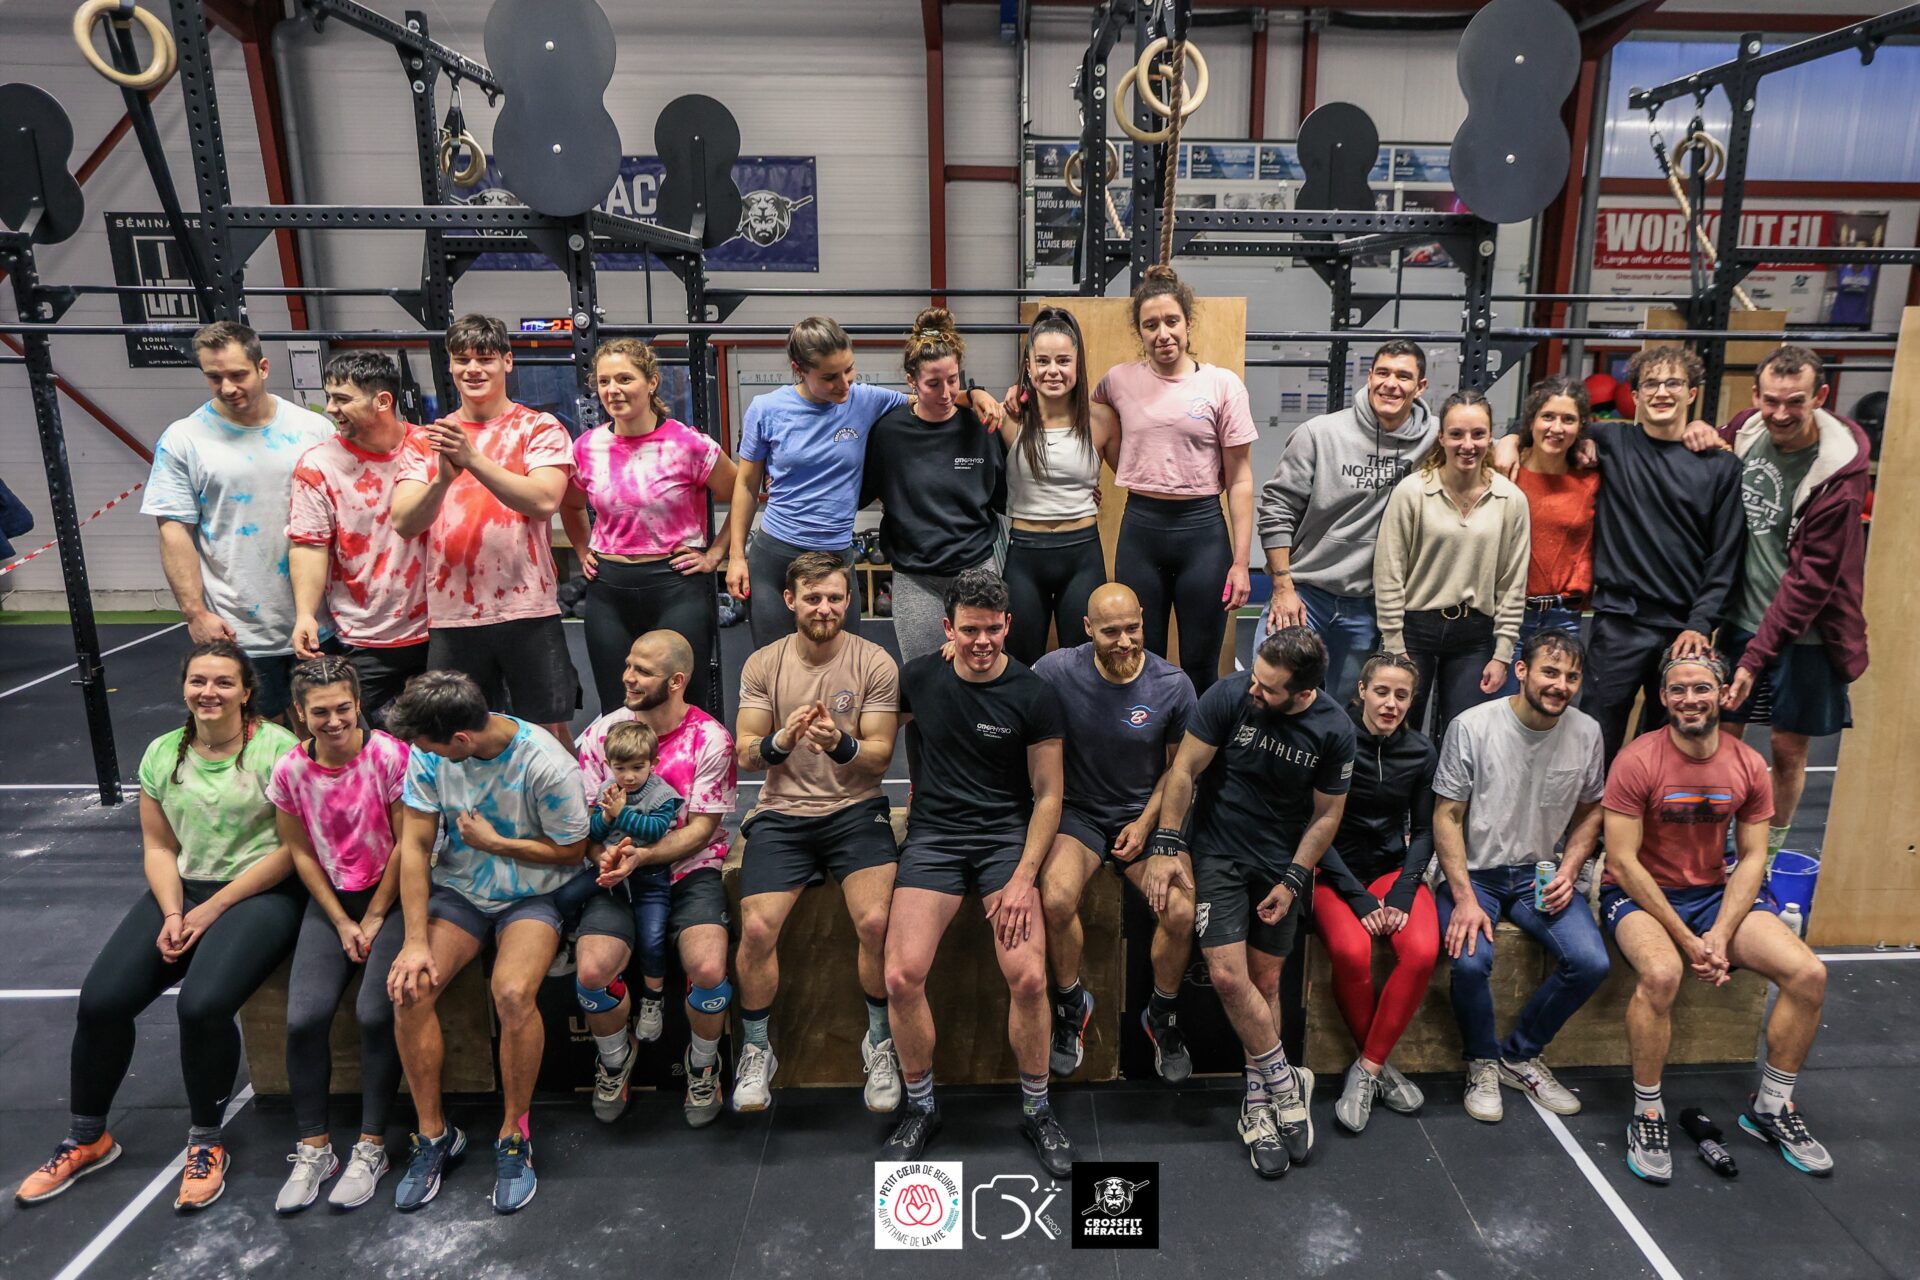 Regional competition of Crossfit organized by Dimitri coach in Crossfit Heracles for the benefit of the association Petit Coeur de Beurre on January 28, 2023 in the room Crossfit Heracles in Brest (29) - Photo DK-Prod/ Crossfit Heracles/ Petit Coeur de Beurre